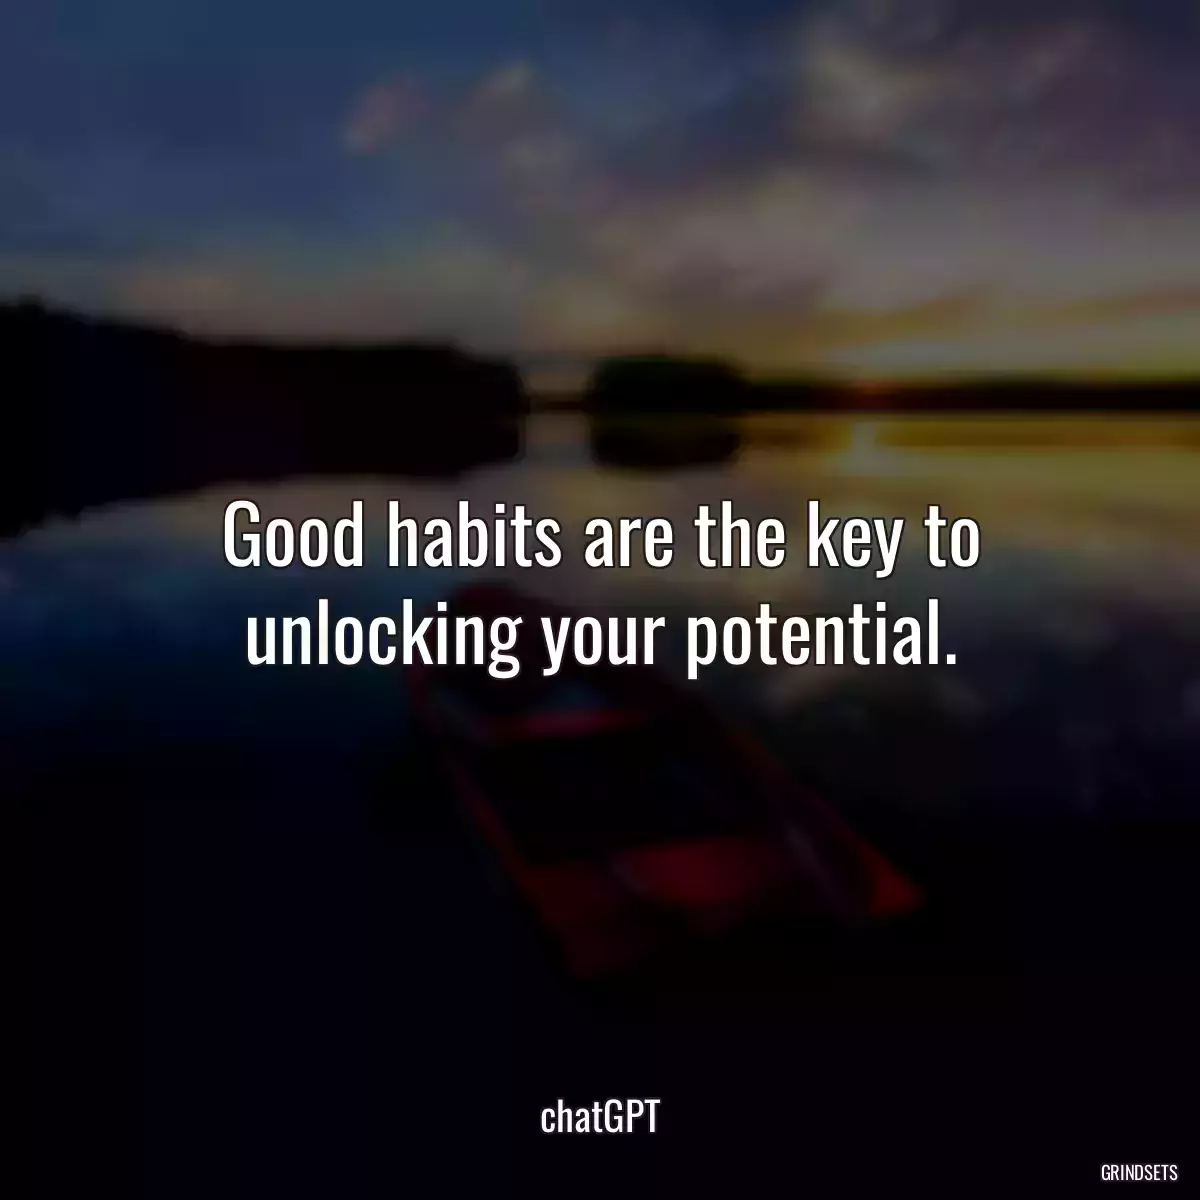 Good habits are the key to unlocking your potential.